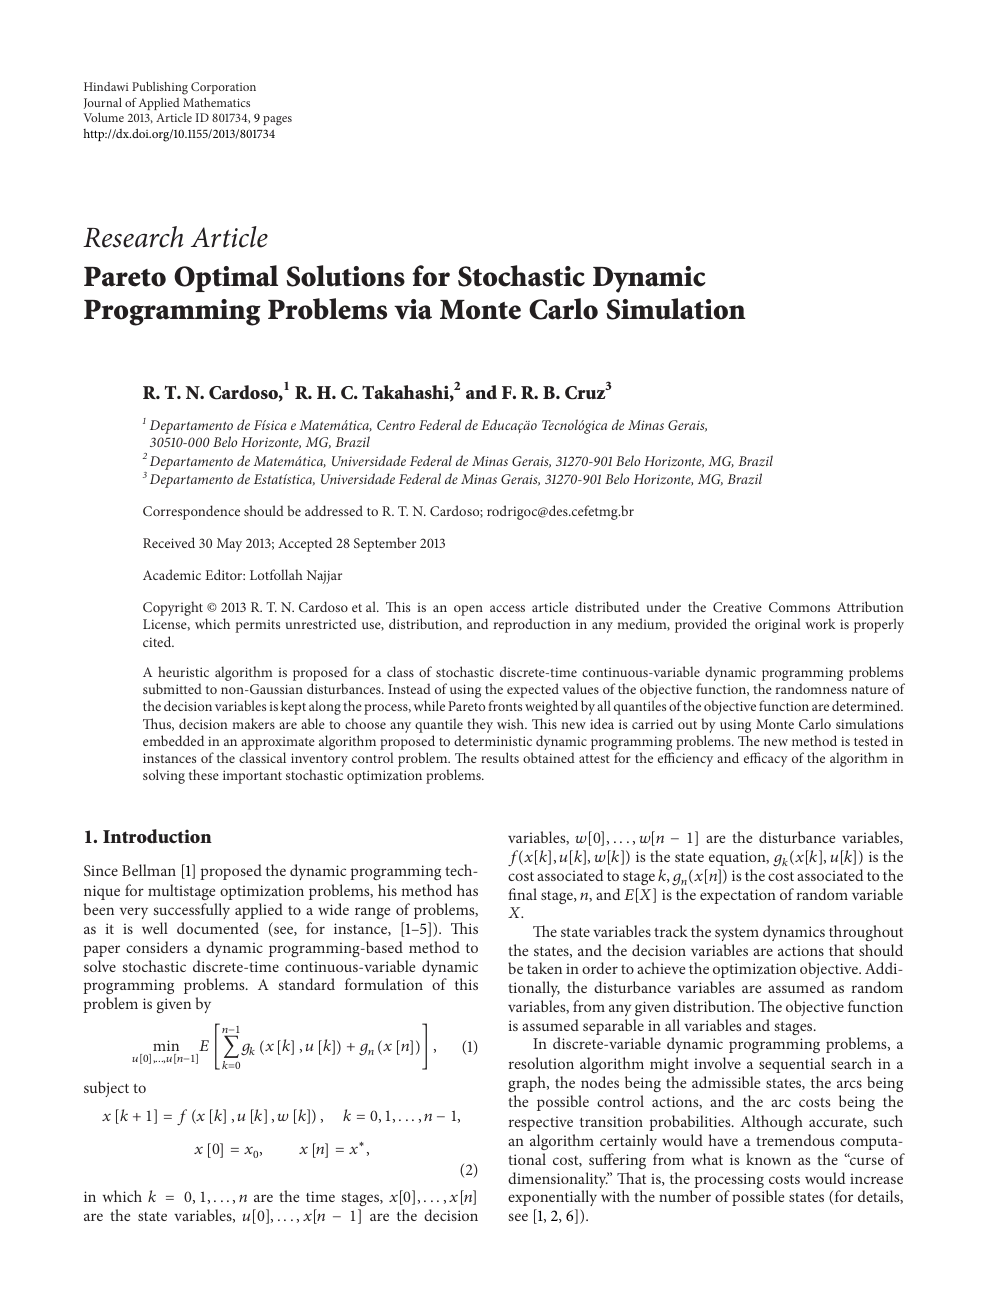 Pareto Optimal Solutions For Stochastic Dynamic Programming Problems Via Monte Carlo Simulation Topic Of Research Paper In Mathematics Download Scholarly Article Pdf And Read For Free On Cyberleninka Open Science Hub